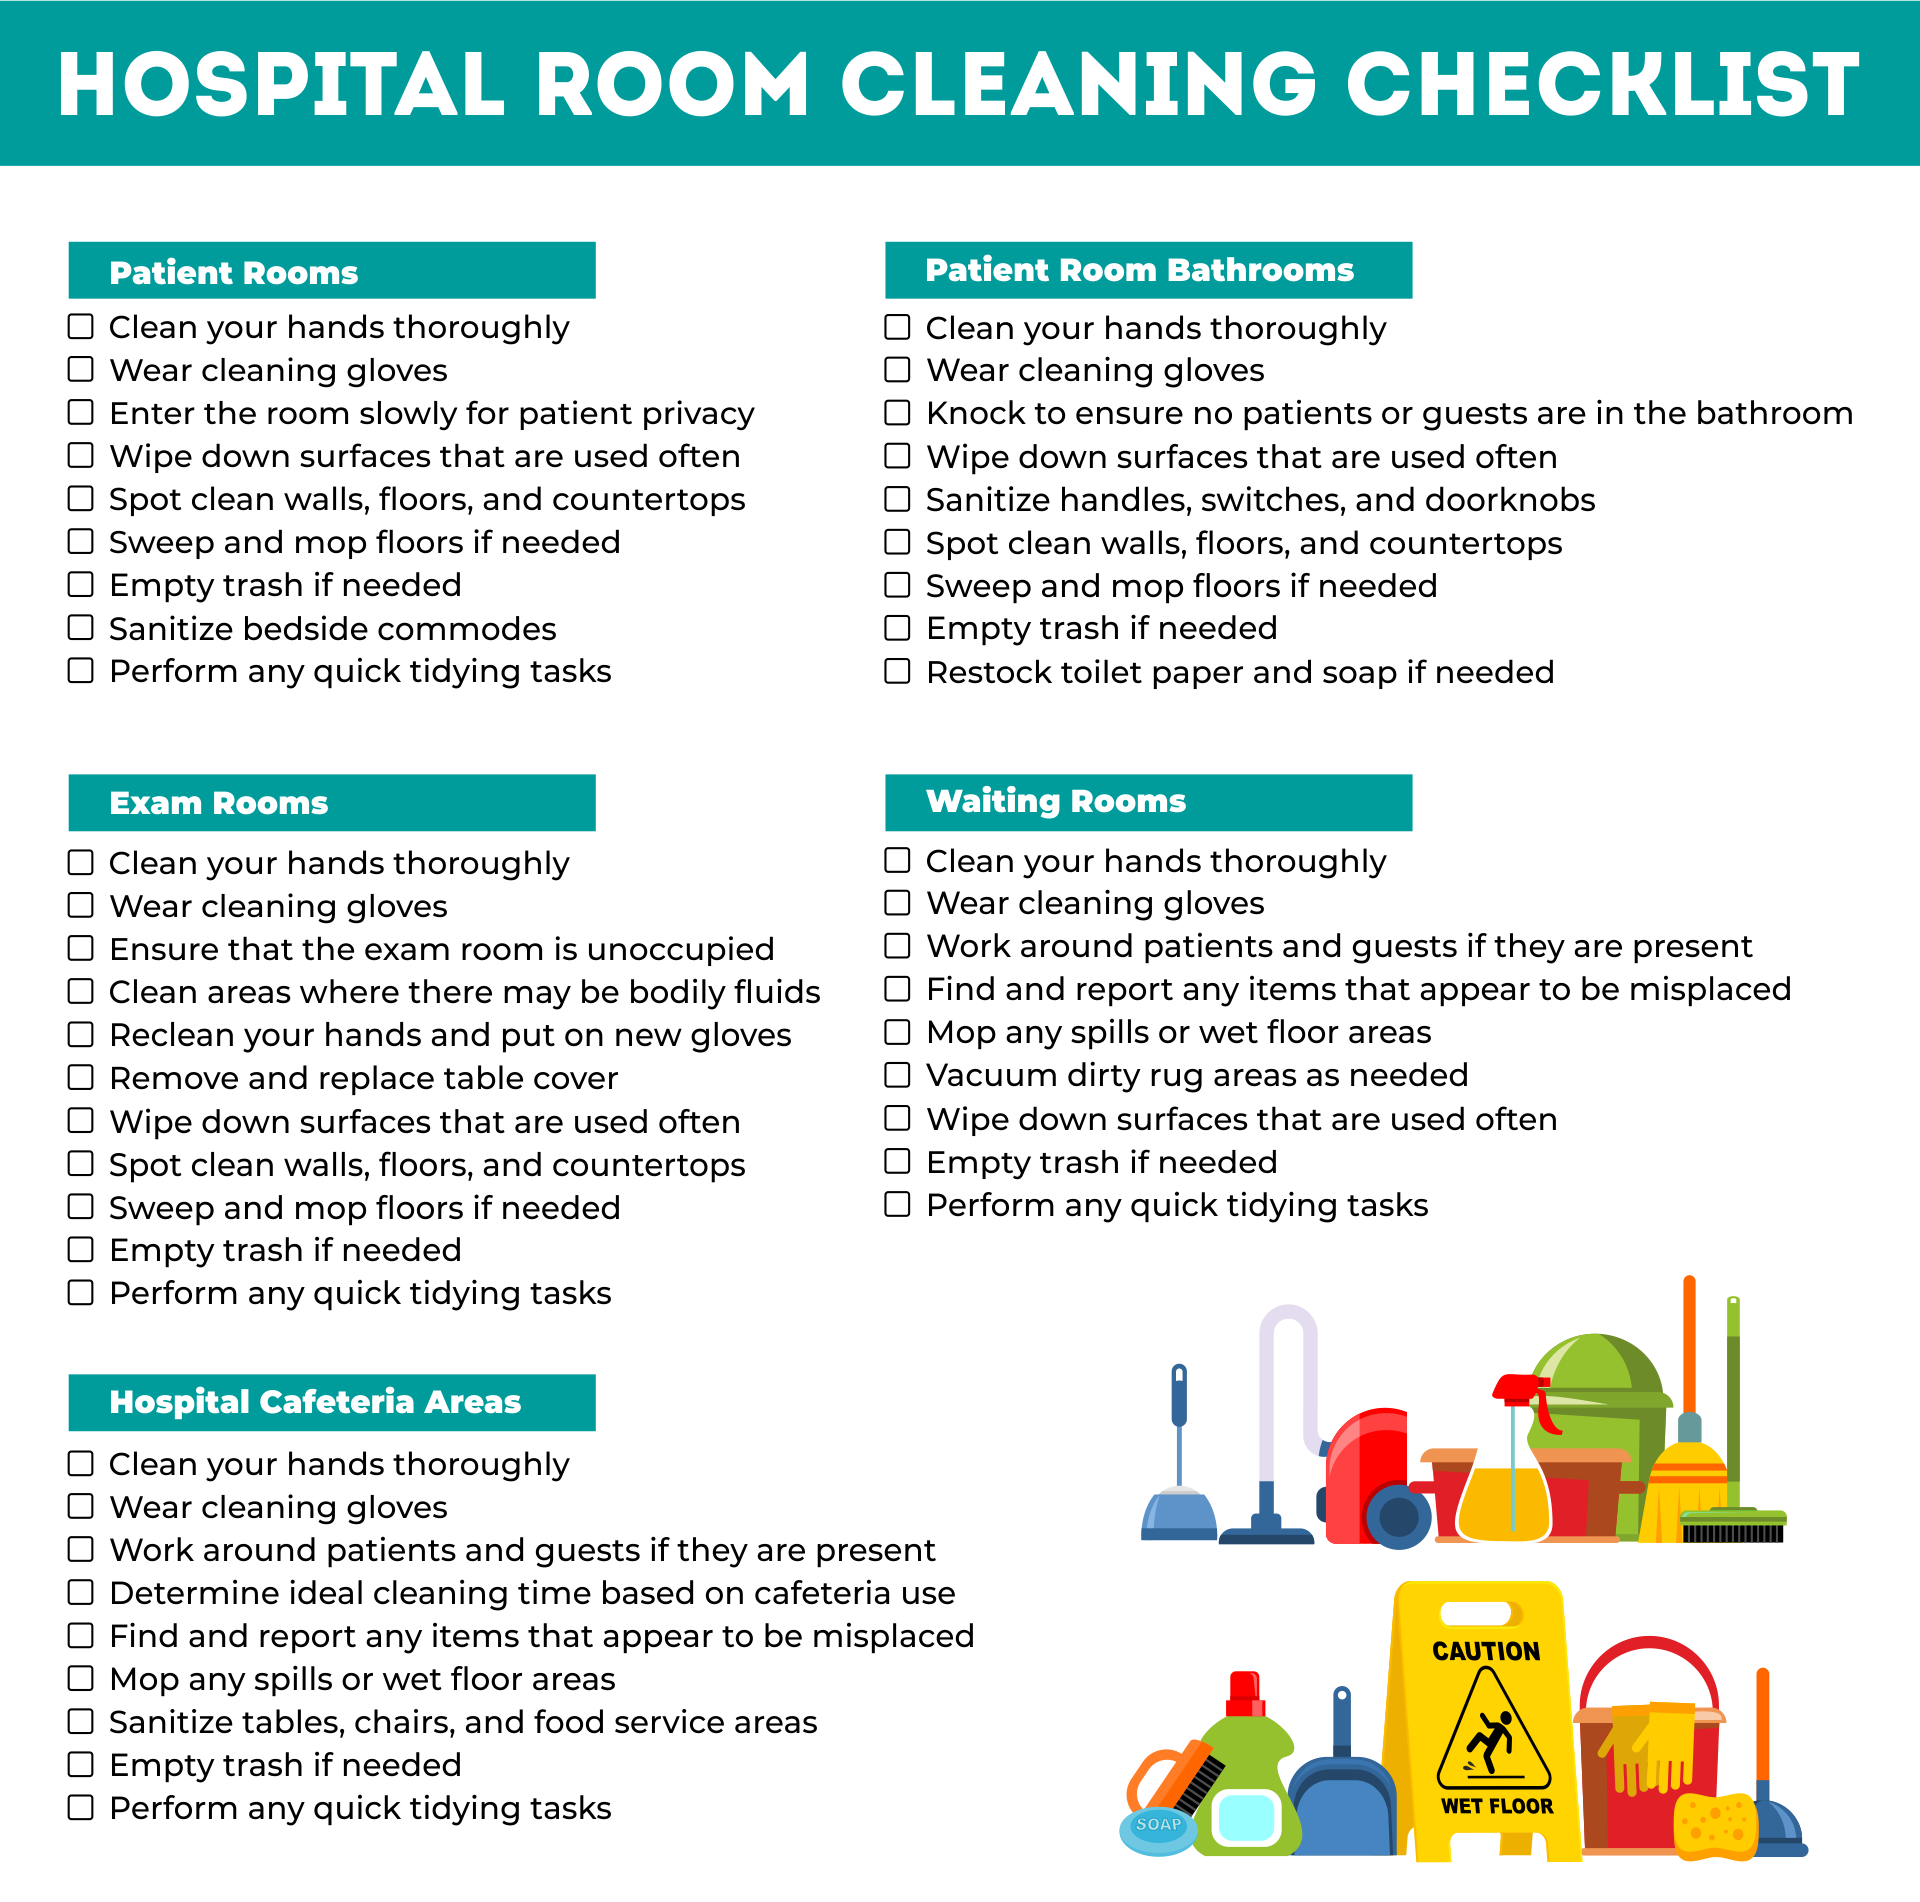 Hospital Room Cleaning Checklist